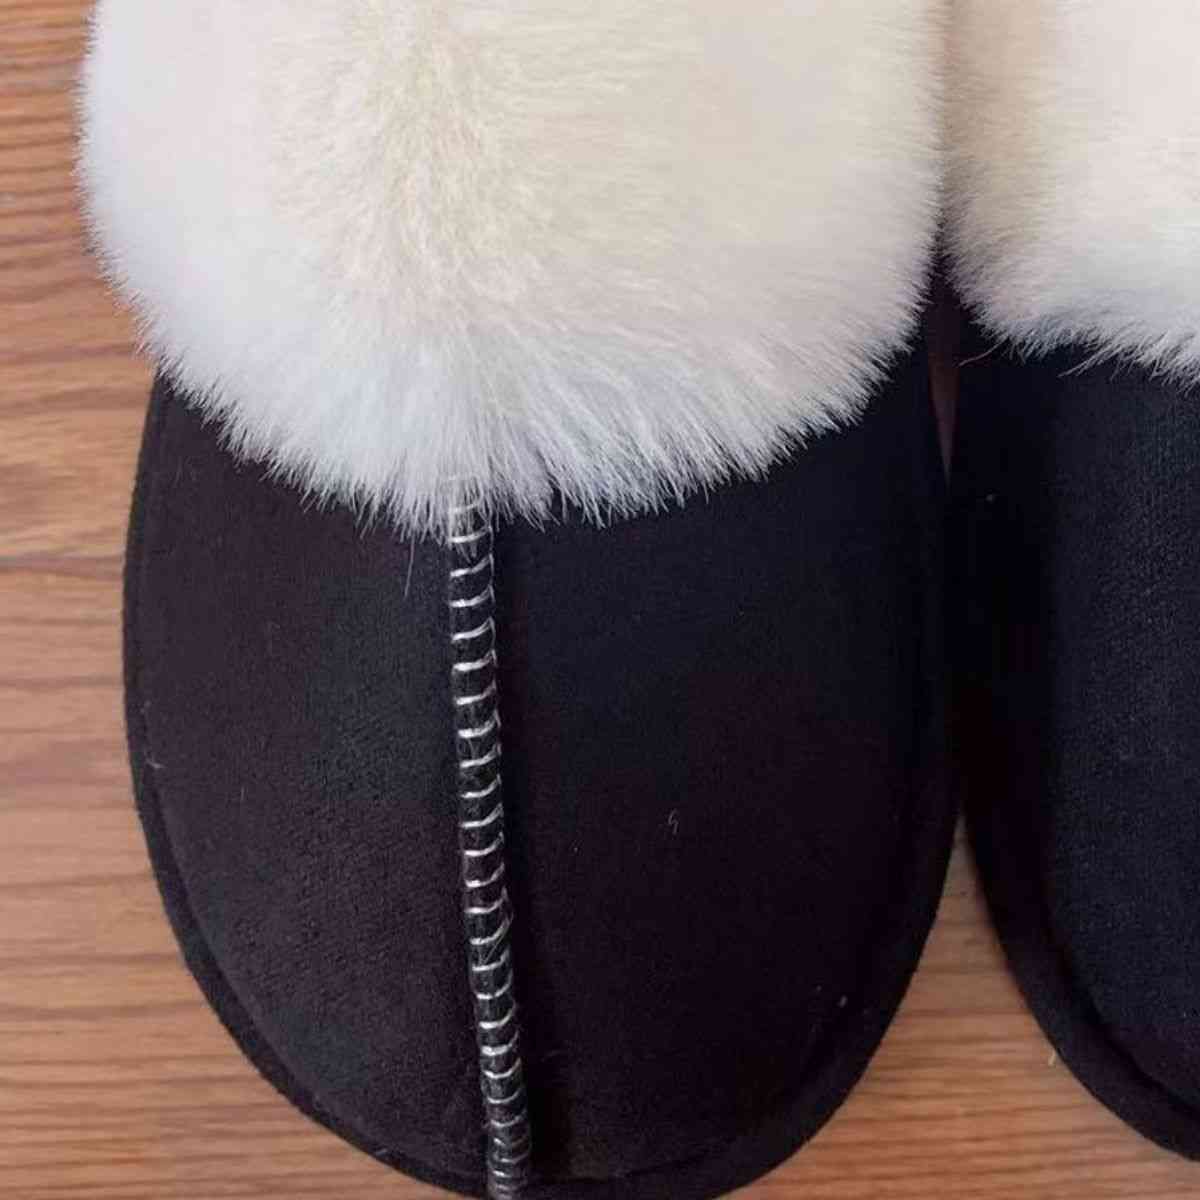 Faux Suede Cozy Slippers